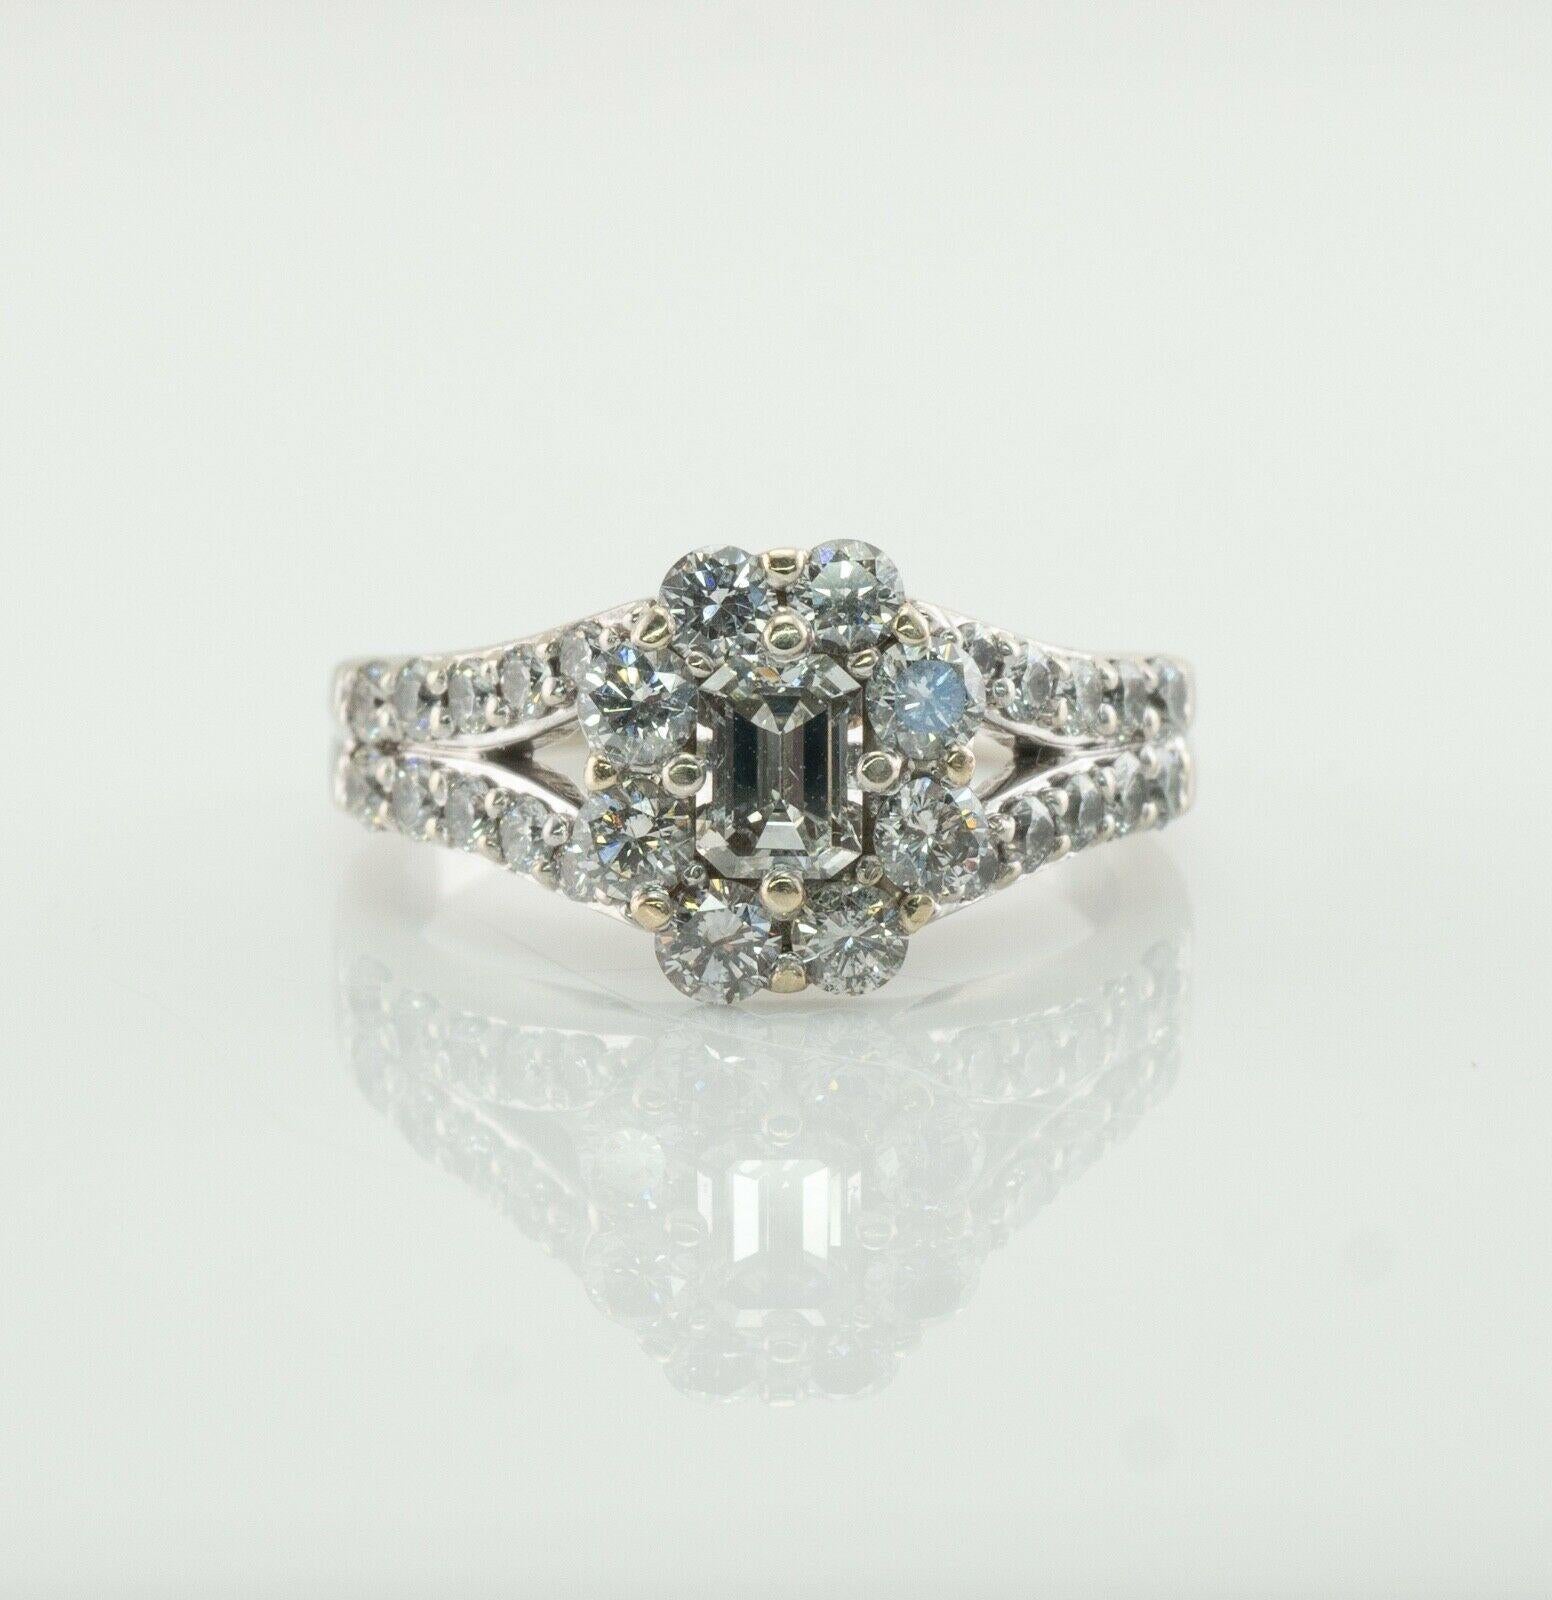 This stunning estate engagement ring is finely crated in solid 14K White gold and set with natural diamonds. The center gem is .20 carat, it is VS1 clarity and H color gem. It is surrounded with 8 round brilliant cut diamonds (total .56 carat) and